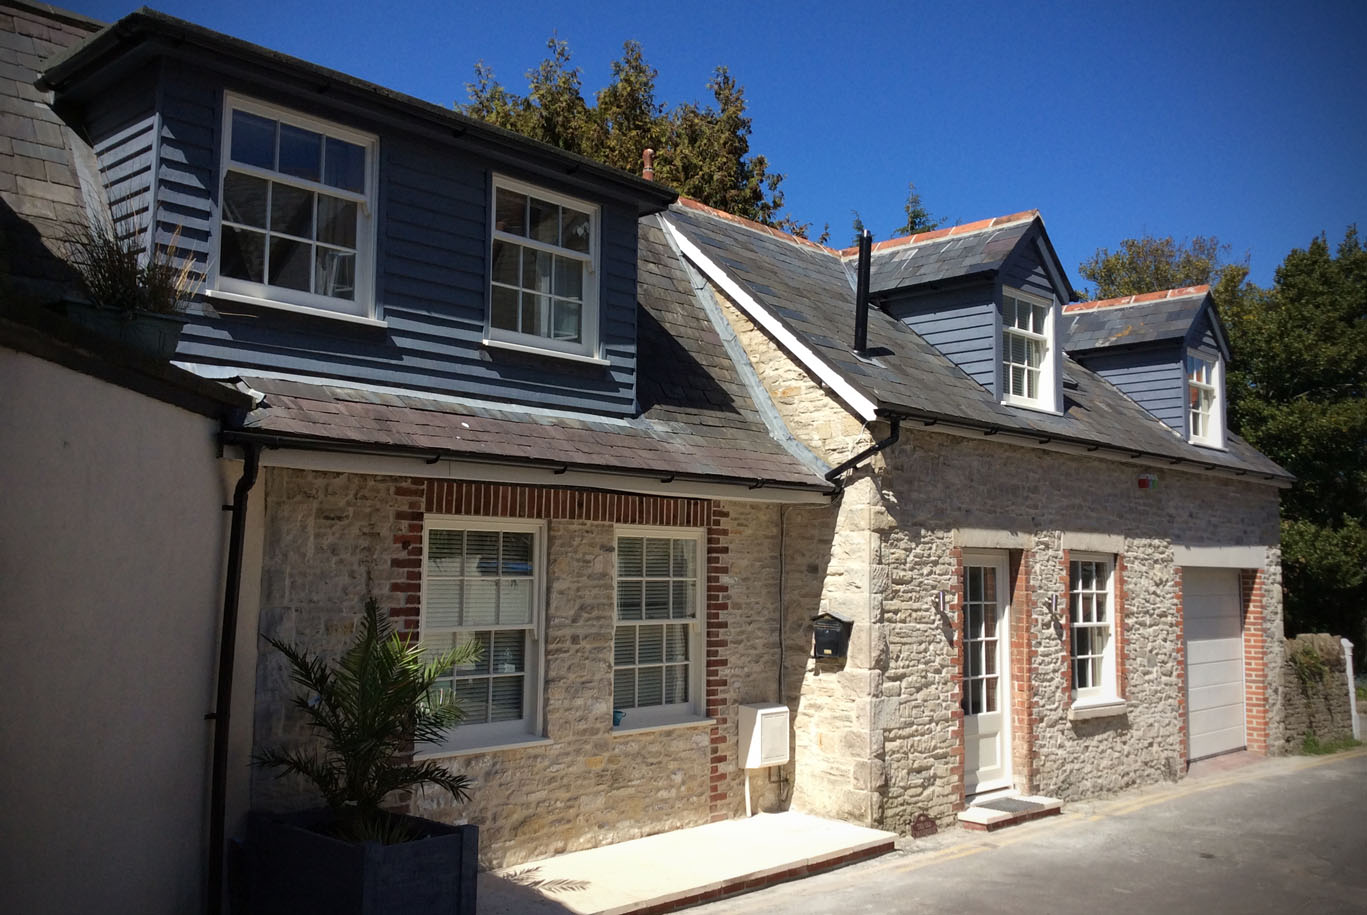 THE OLD BAKE HOUSE, SWANAGE